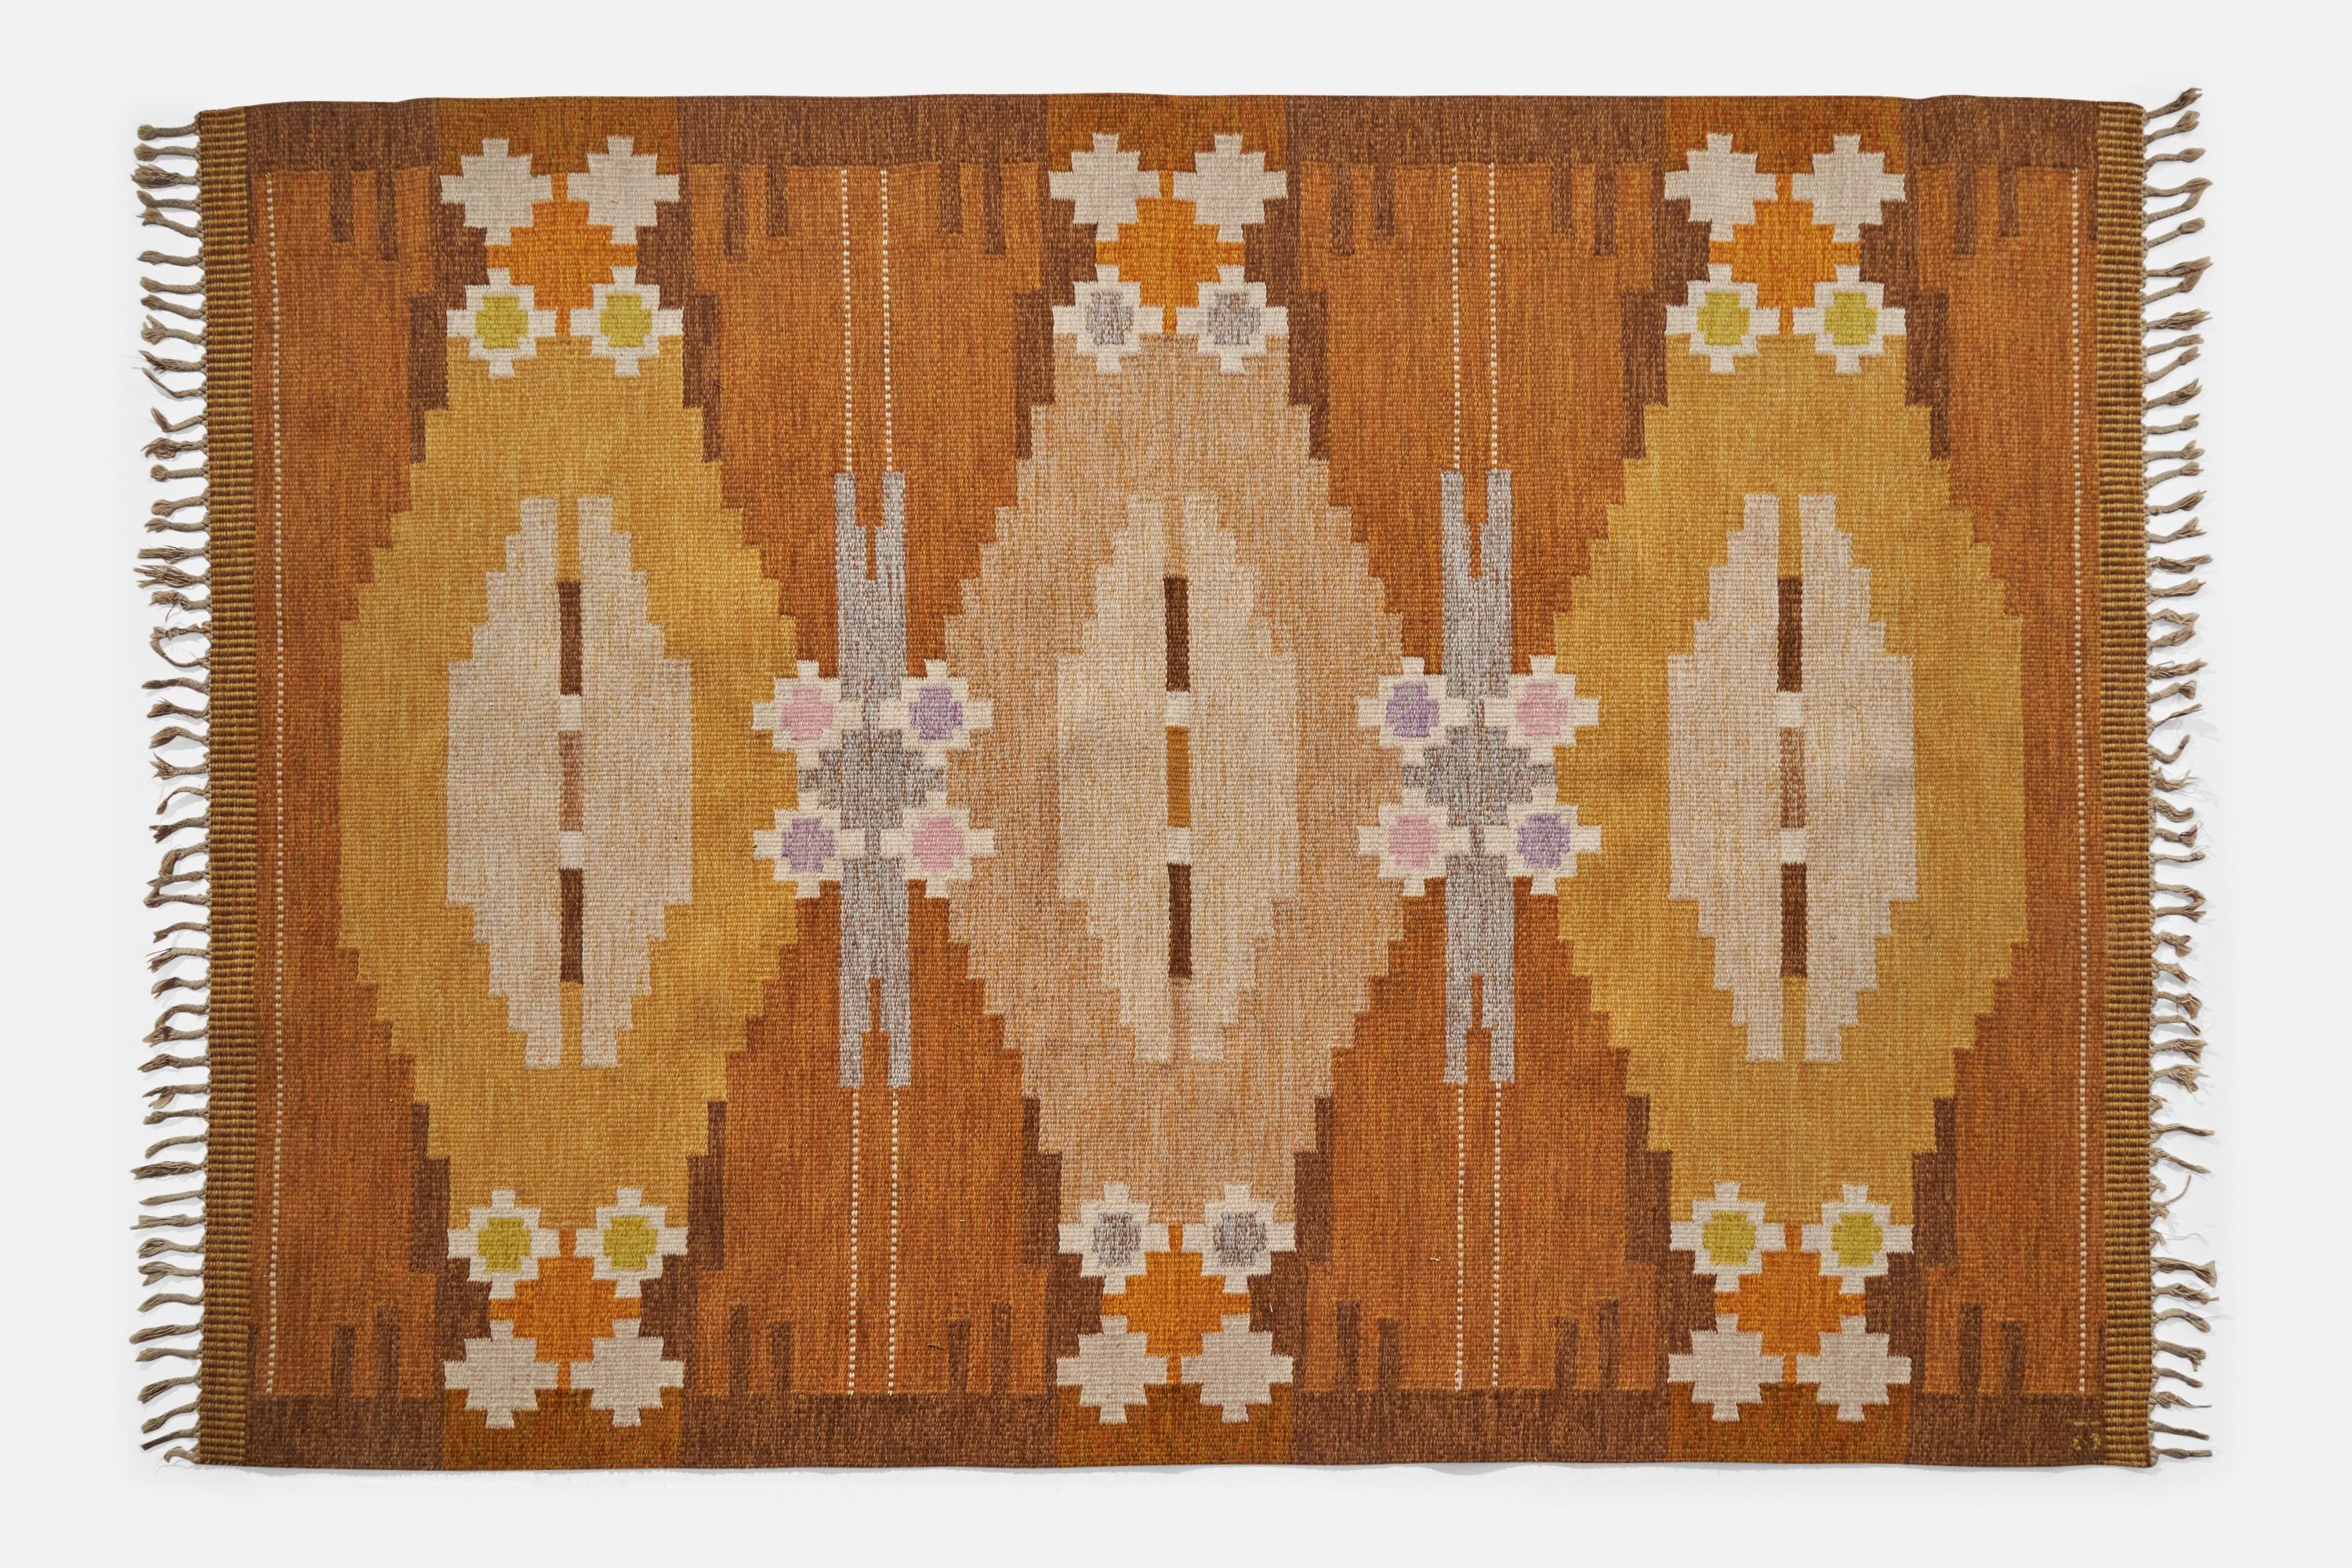 An orange, brown and yellow-dyed flatweave wool carpet designed and produced by Ingegerd Silow, Sweden, c. 1950s.